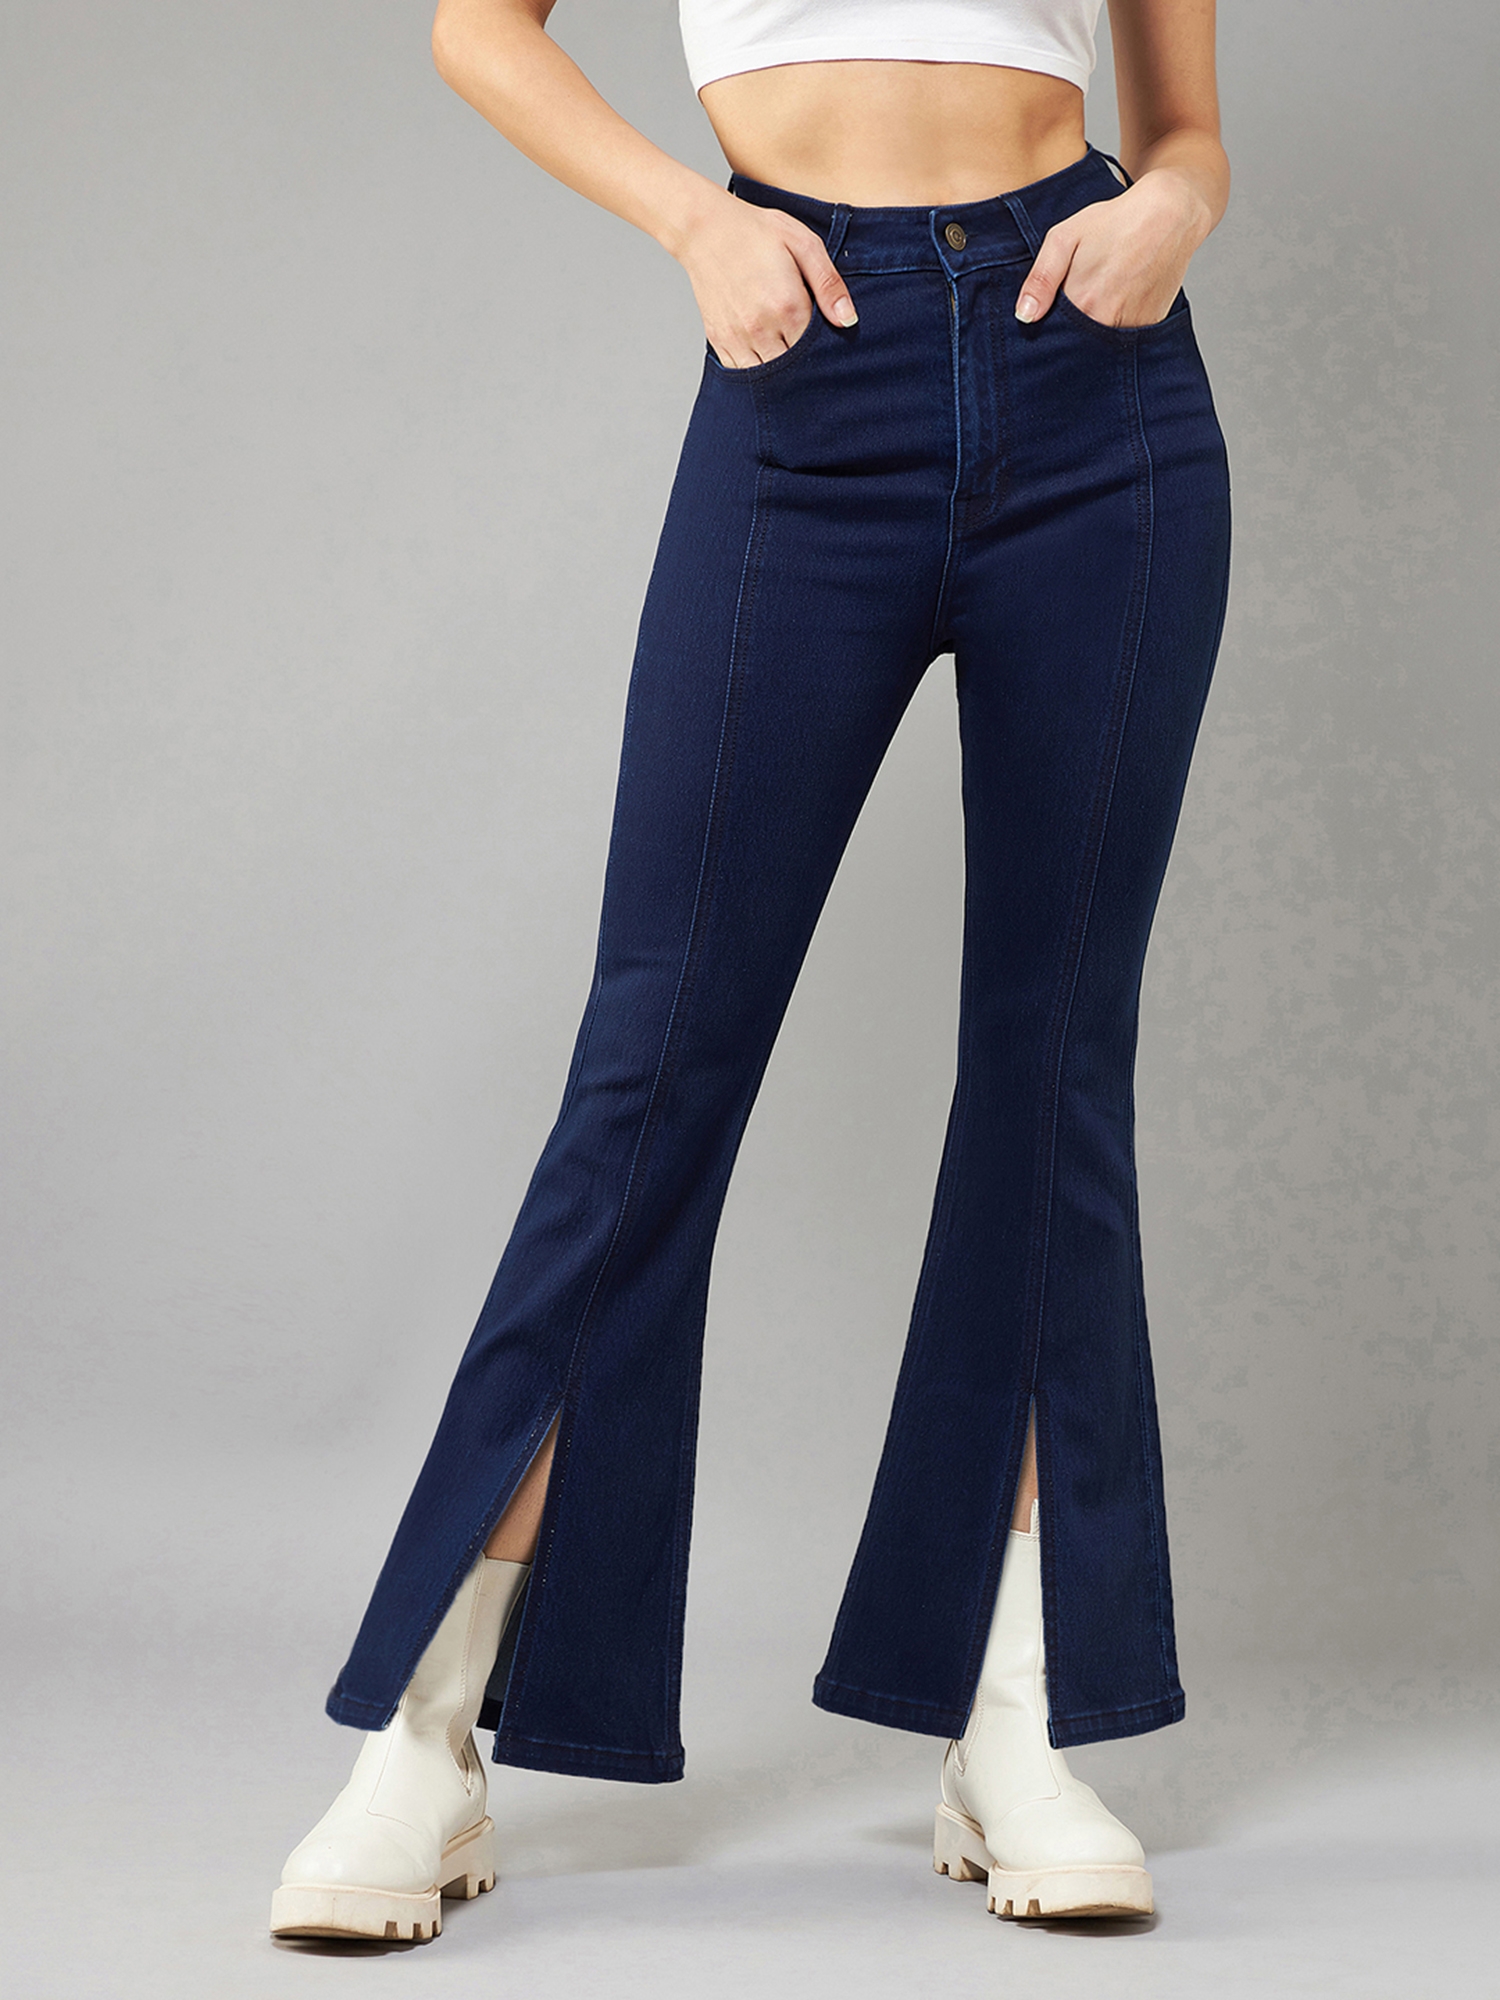 Buy Women Blue Bootcut-Slim Boot Cut Fit High Rise Jeans | Wrangler® India  Official Online Store